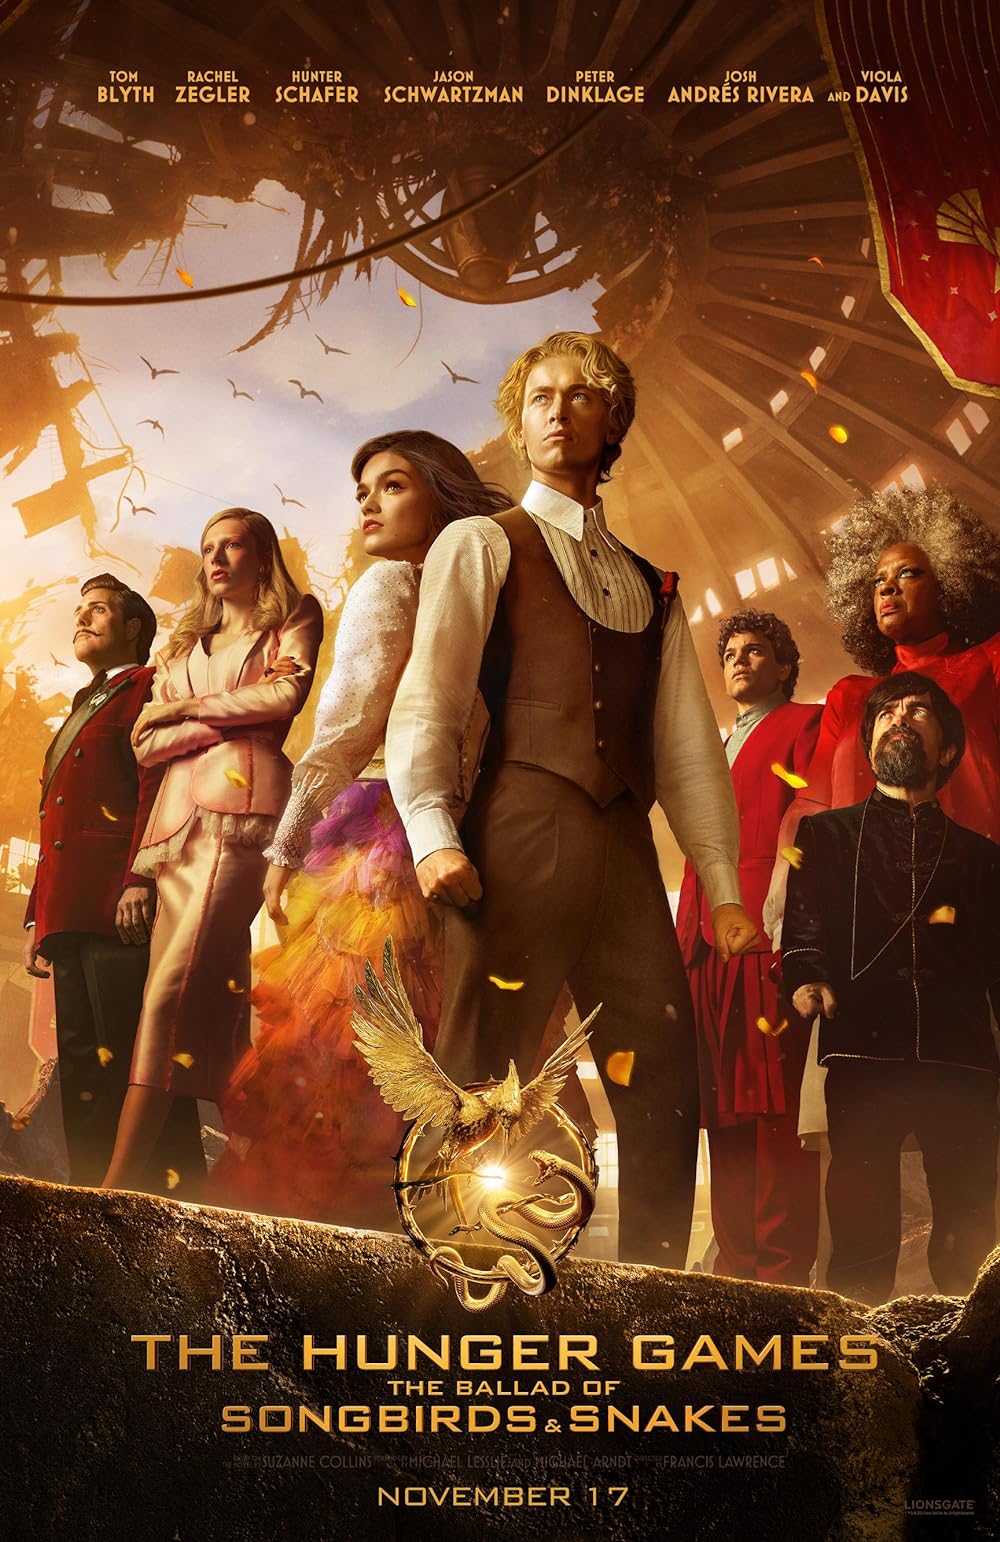 THE HUNGER GAMES: THE BALLAD OF SONGBIRDS & SNAKES – Grand Theatres